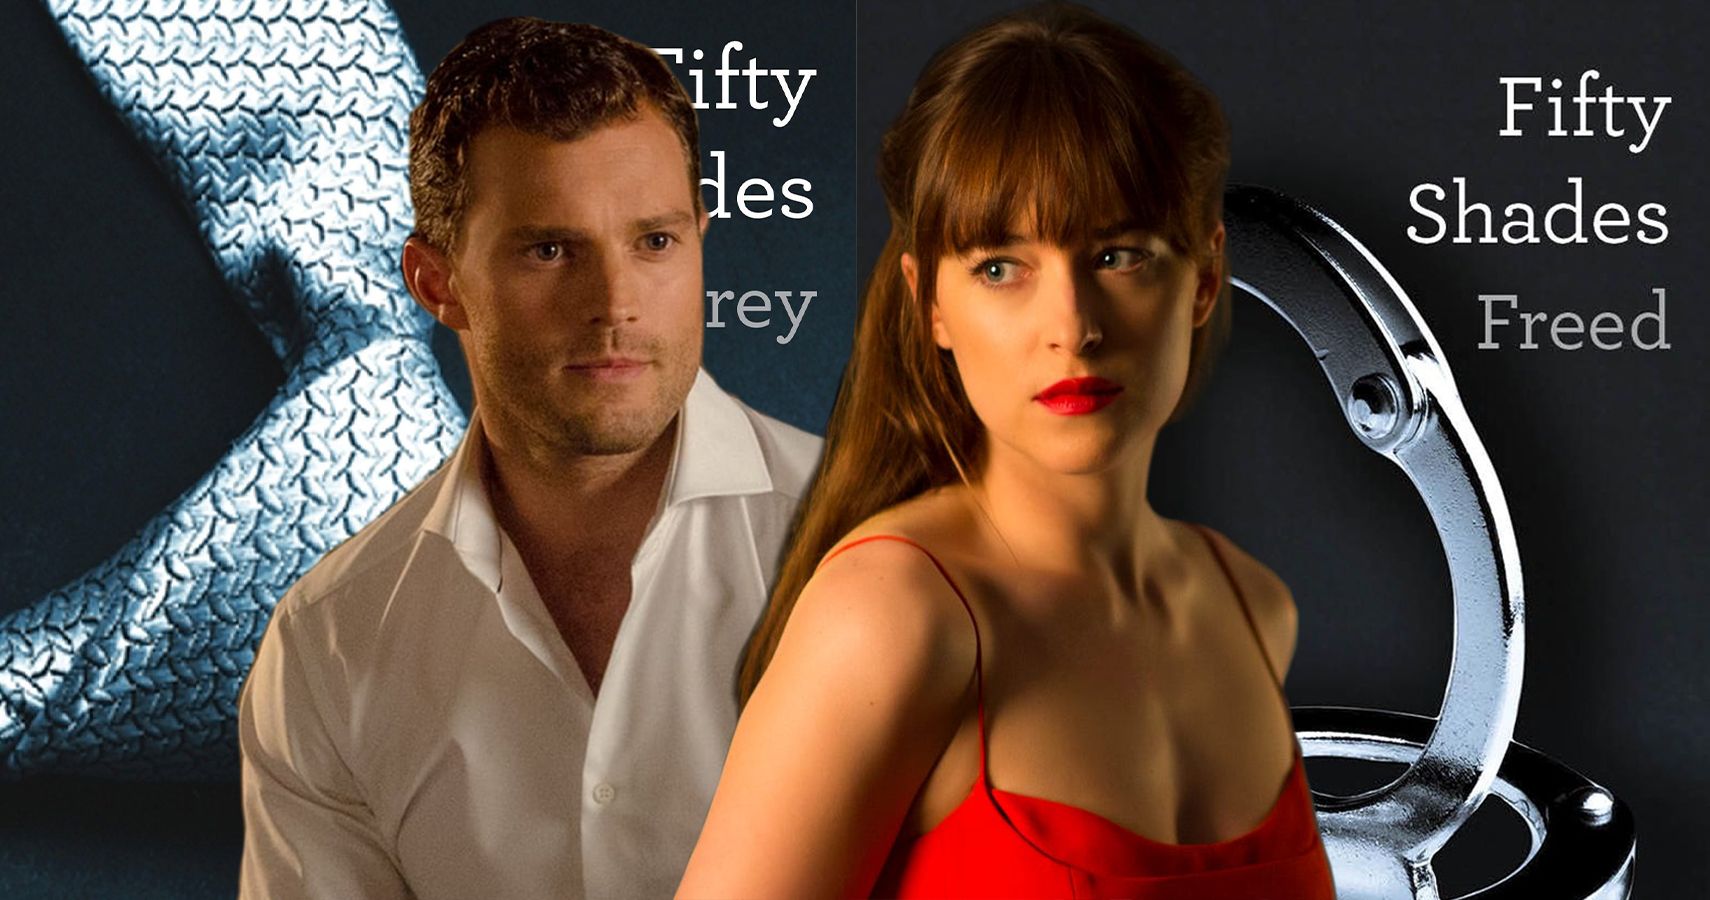 Gallery of Nonton Fifty Shades Of Freed.